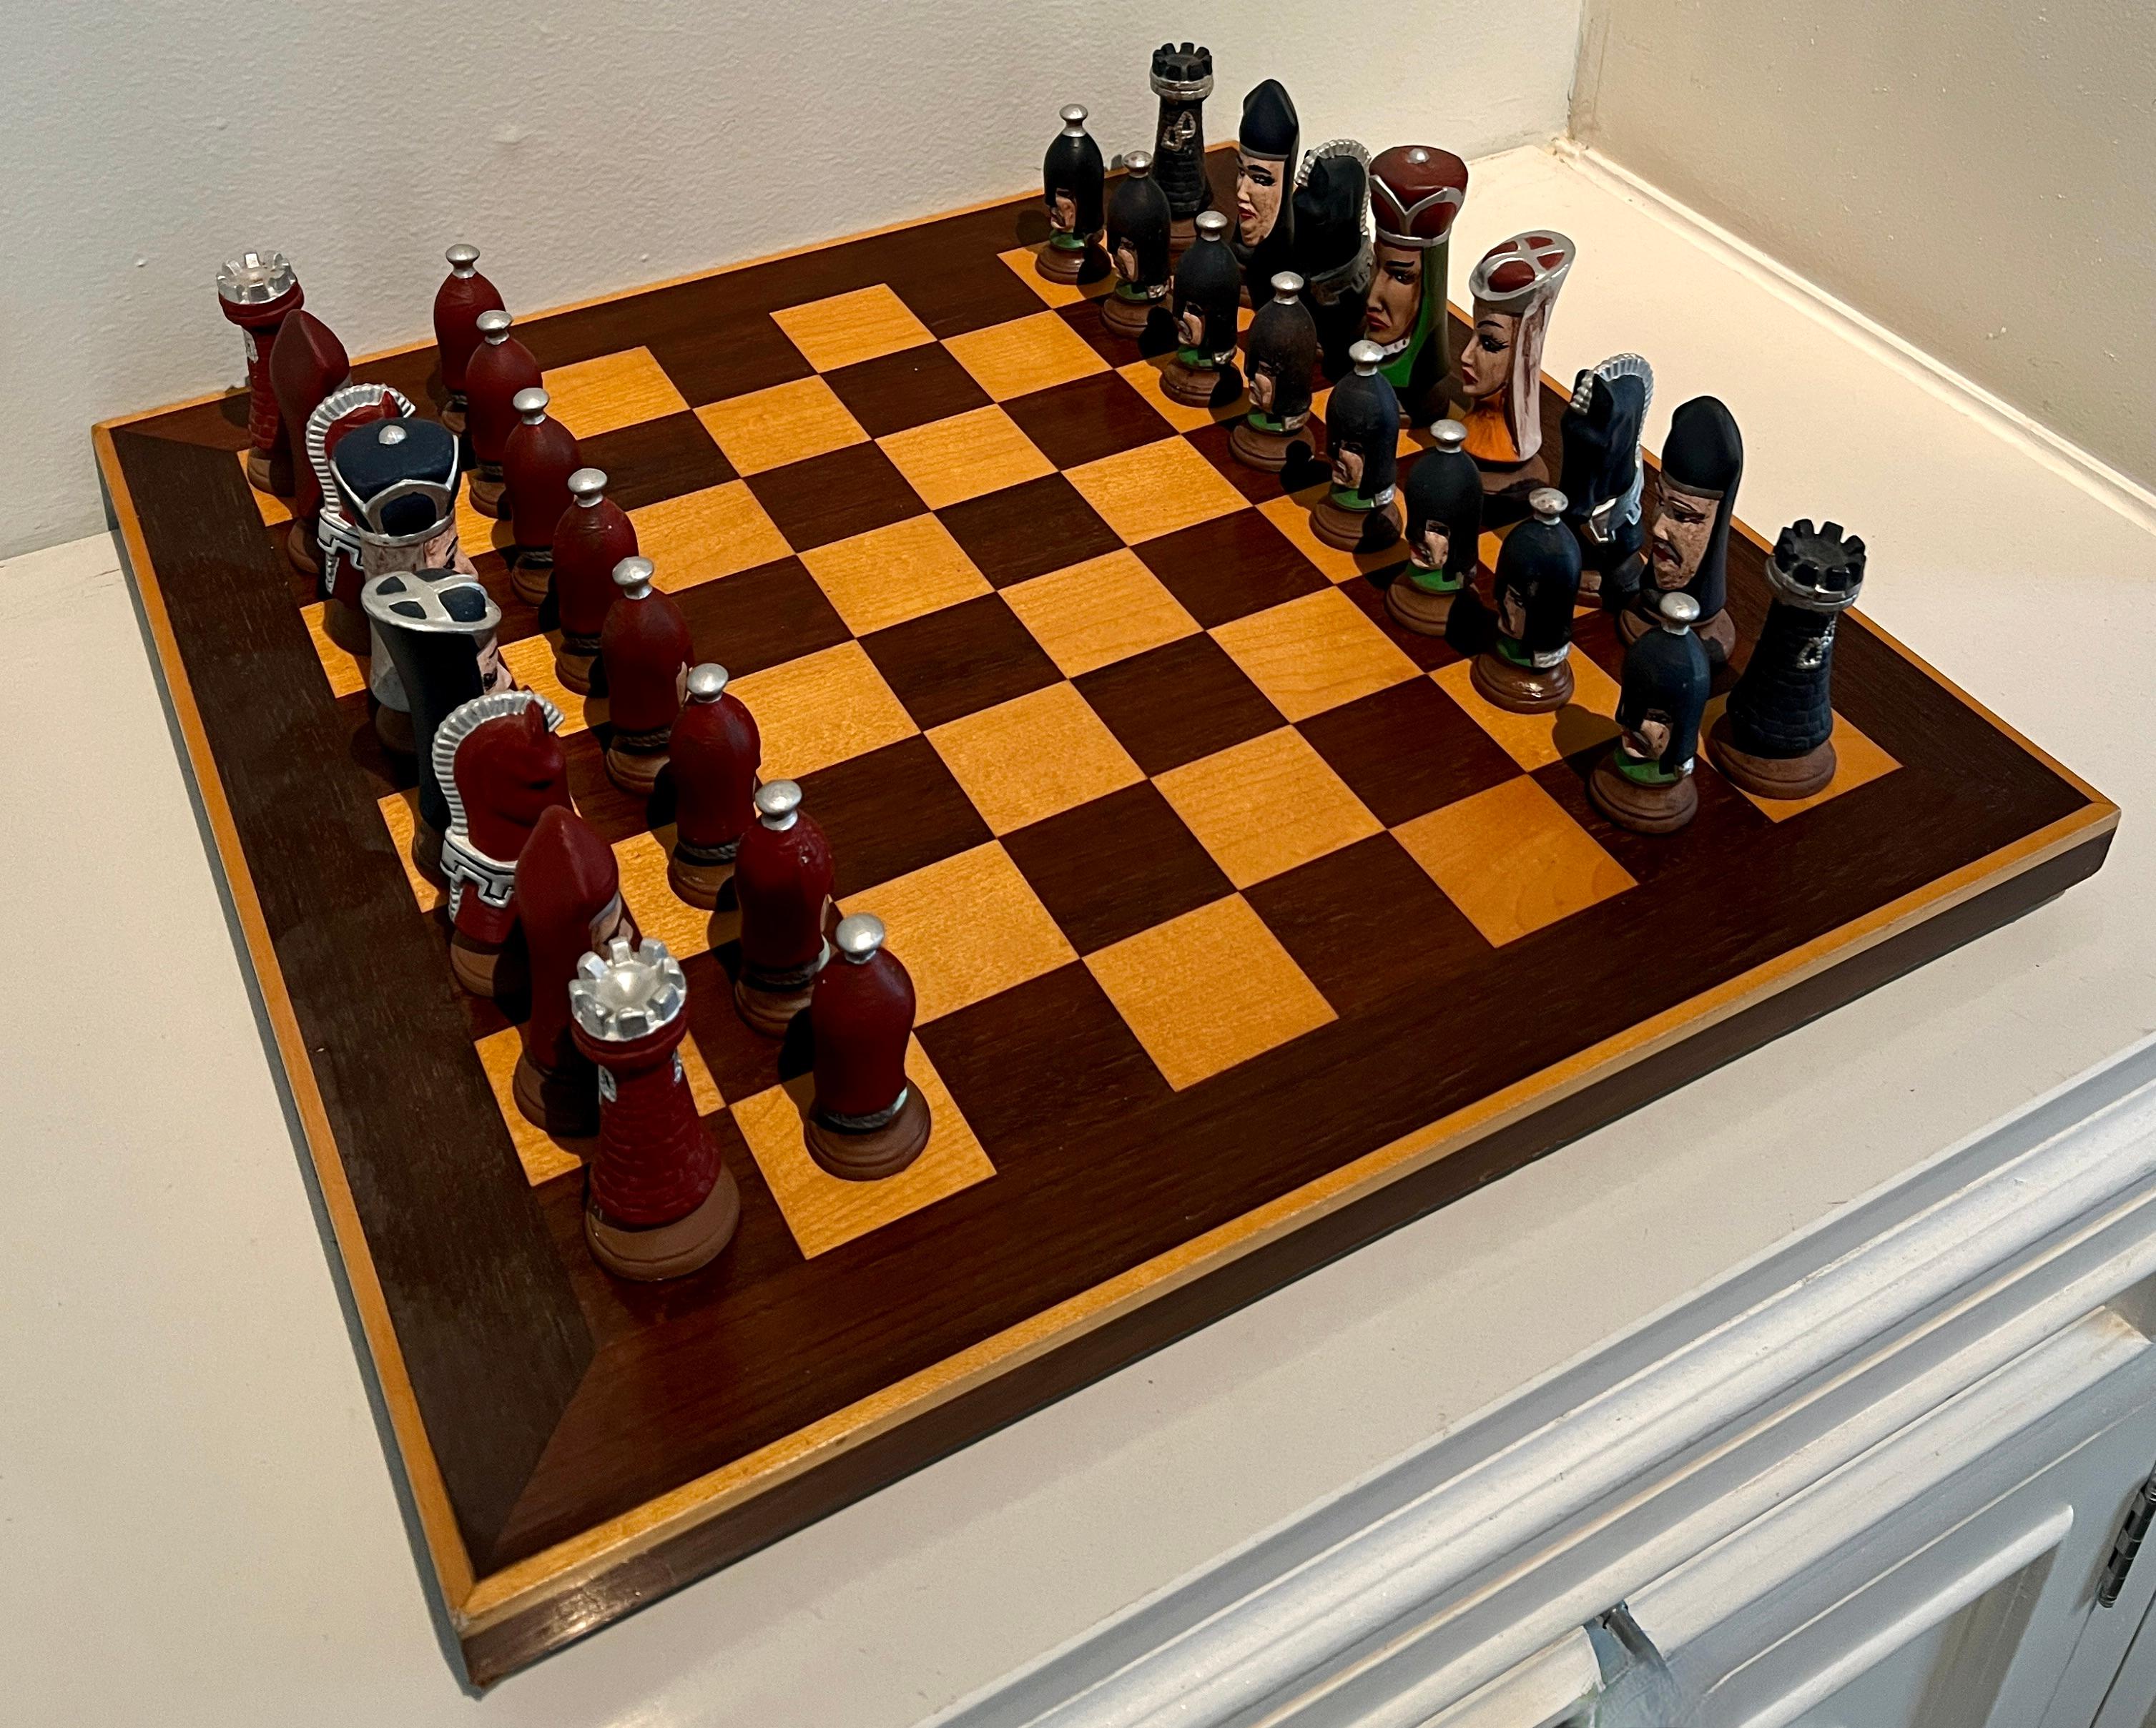 Solid Wood Chess Checker Board with small raised feet and underside felt lined.

Accompanied with hand made Ceramic Chess Pieces by Sally Anderson - in very good vintage condition.  A compliment to any space.  Can be pulled out for special occasions